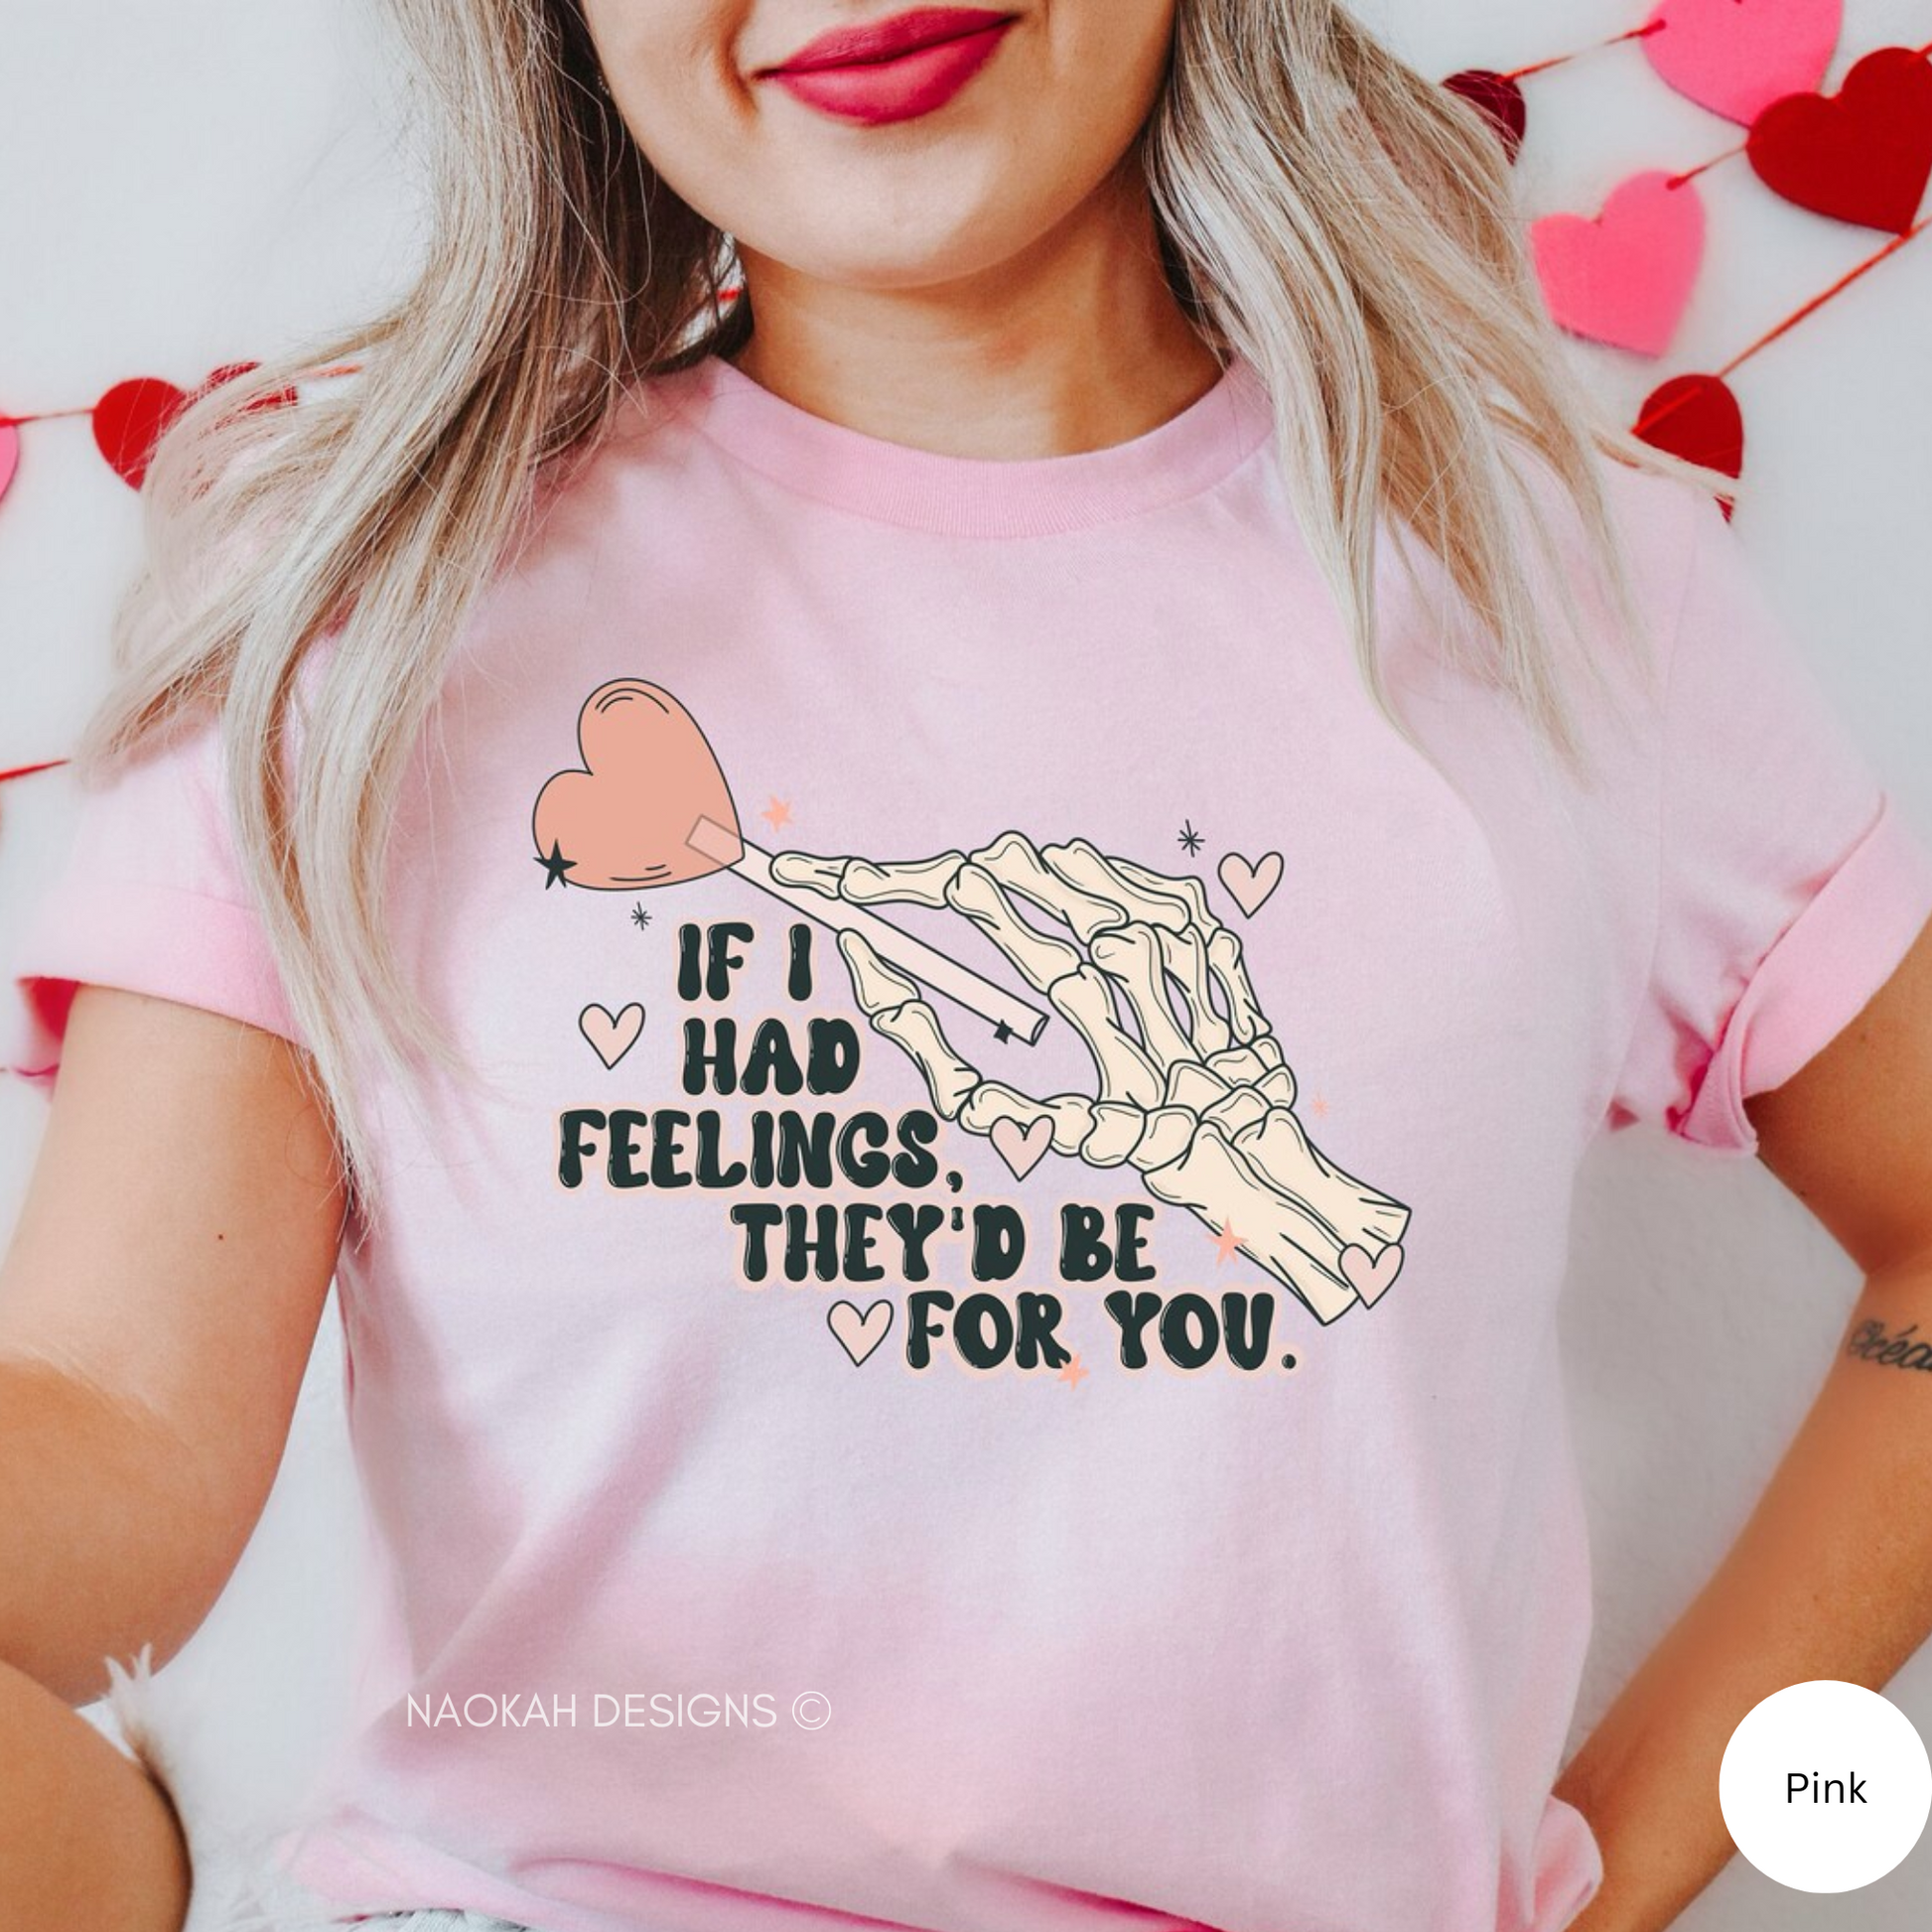 If Had Feelings They’d Be For You Shirt, Love Shirt, Valentine Day Gift Shirt, Funny Valentine's Day, Skeleton Valentine Tee, Heart Shirt